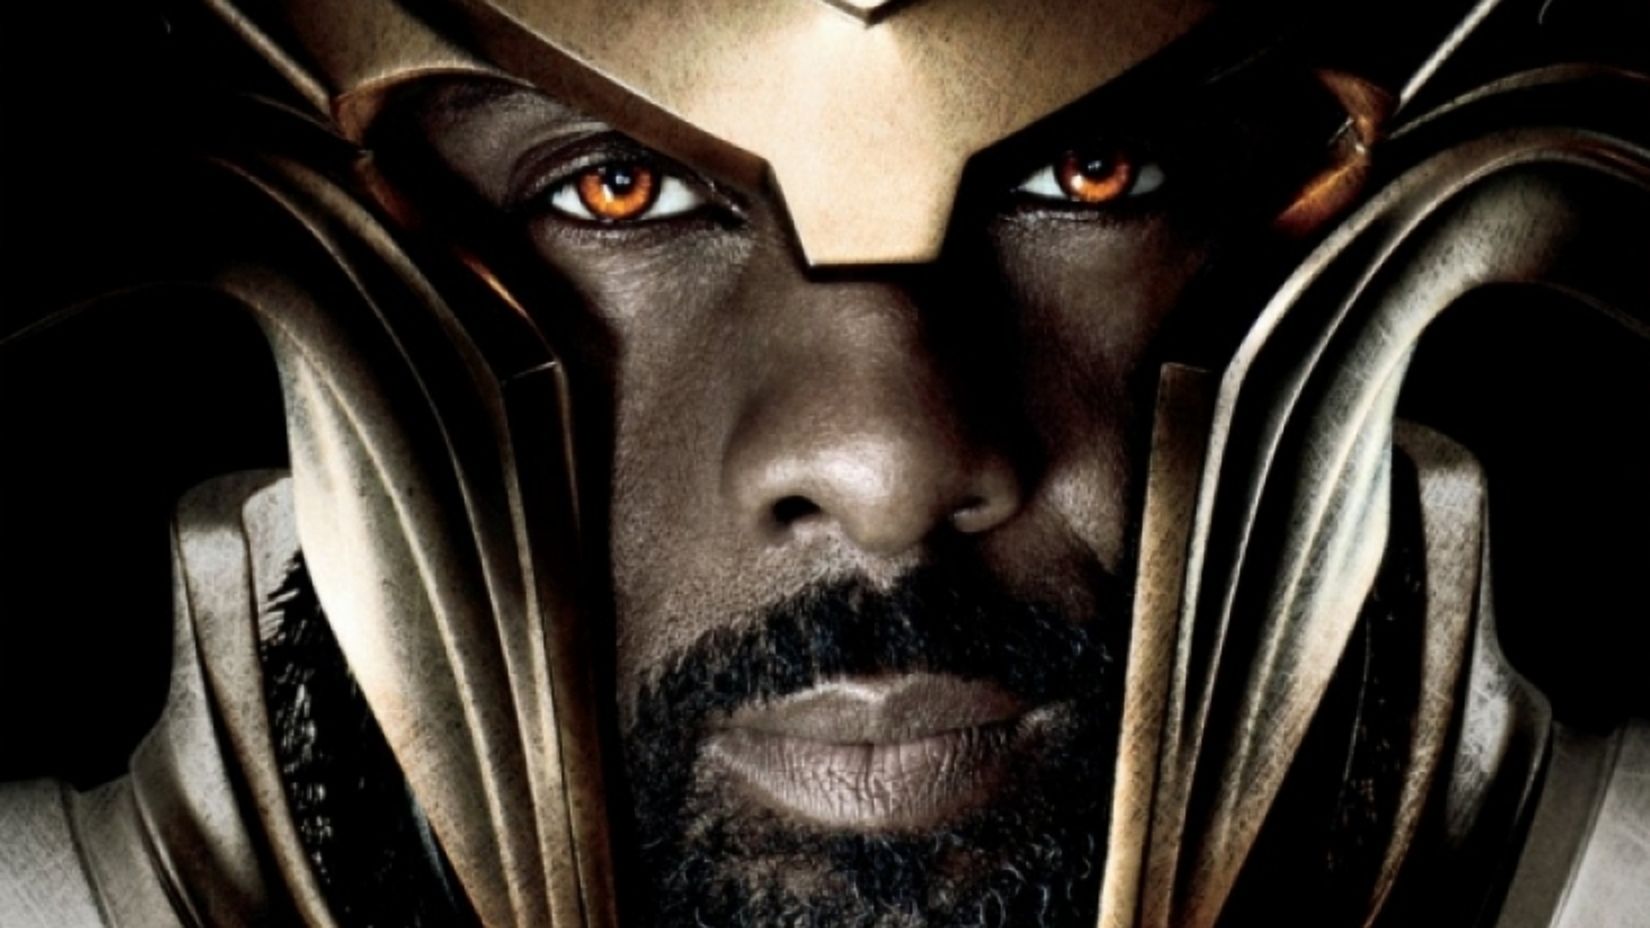 What does Heimdall see in Thor's eyes in God of war Ragnarok